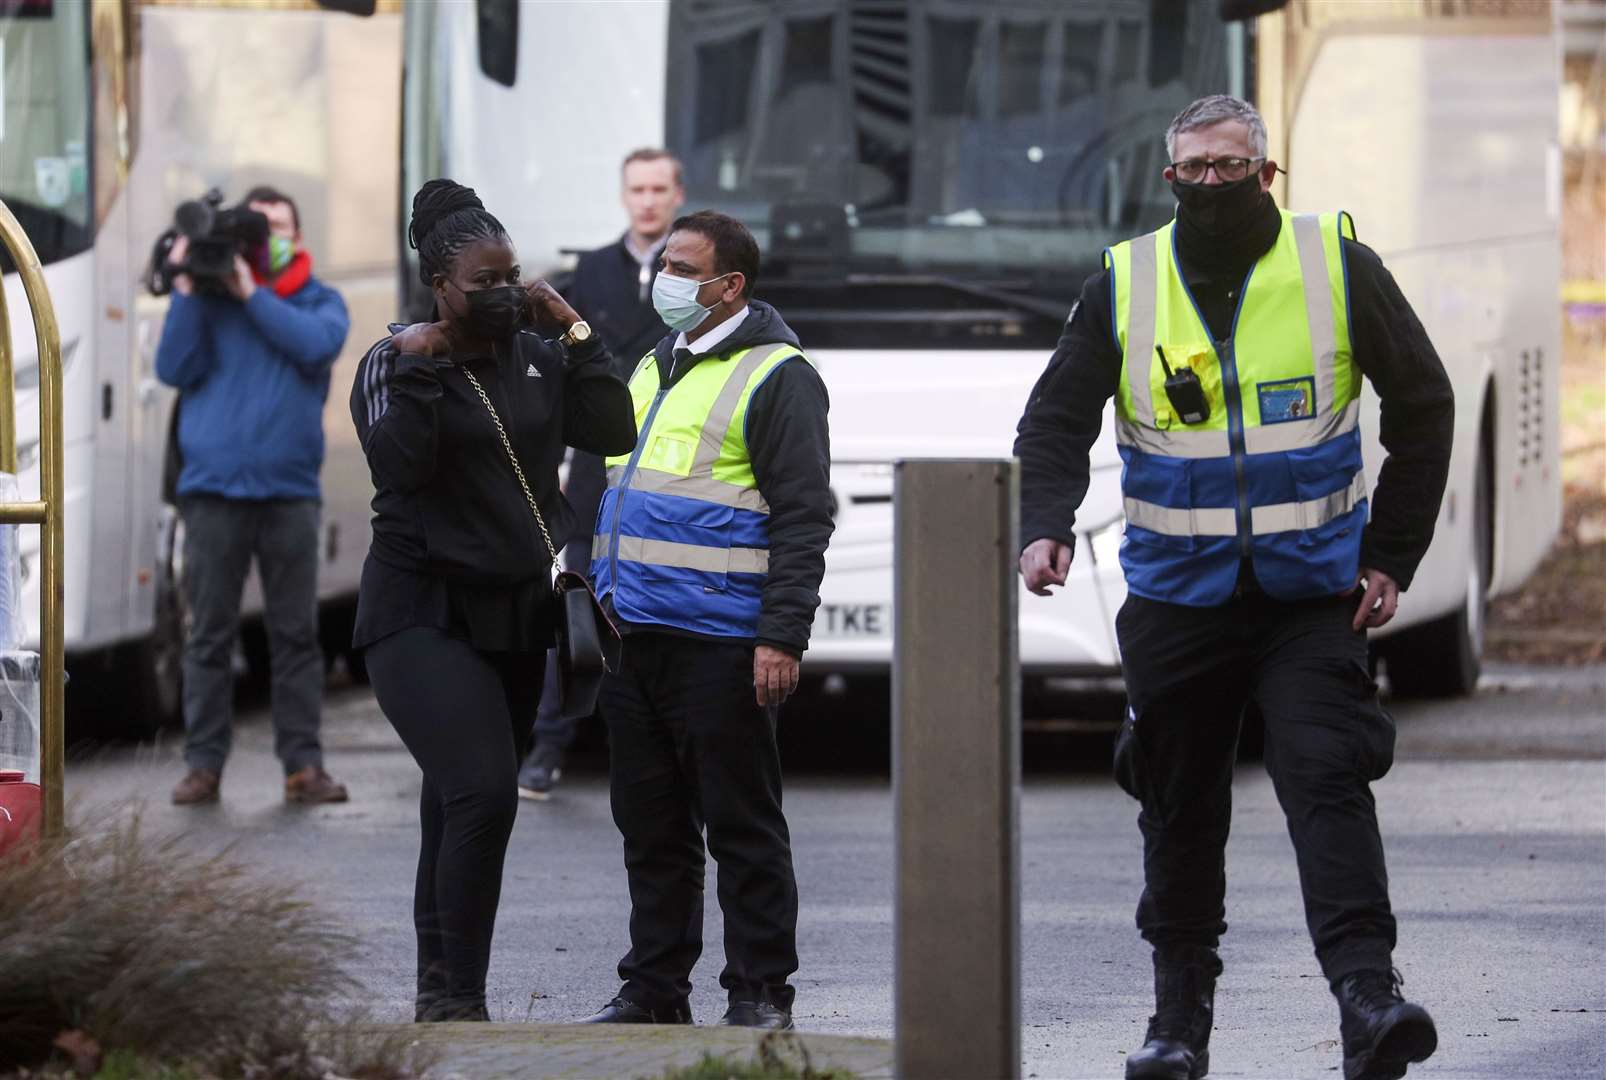 Passengers arrive at a Holiday Inn near Heathrow Airport, where they will remain during a 10 day quarantine period after returning to England from one of 33 “red list” countries (Steve Parsons/PA)